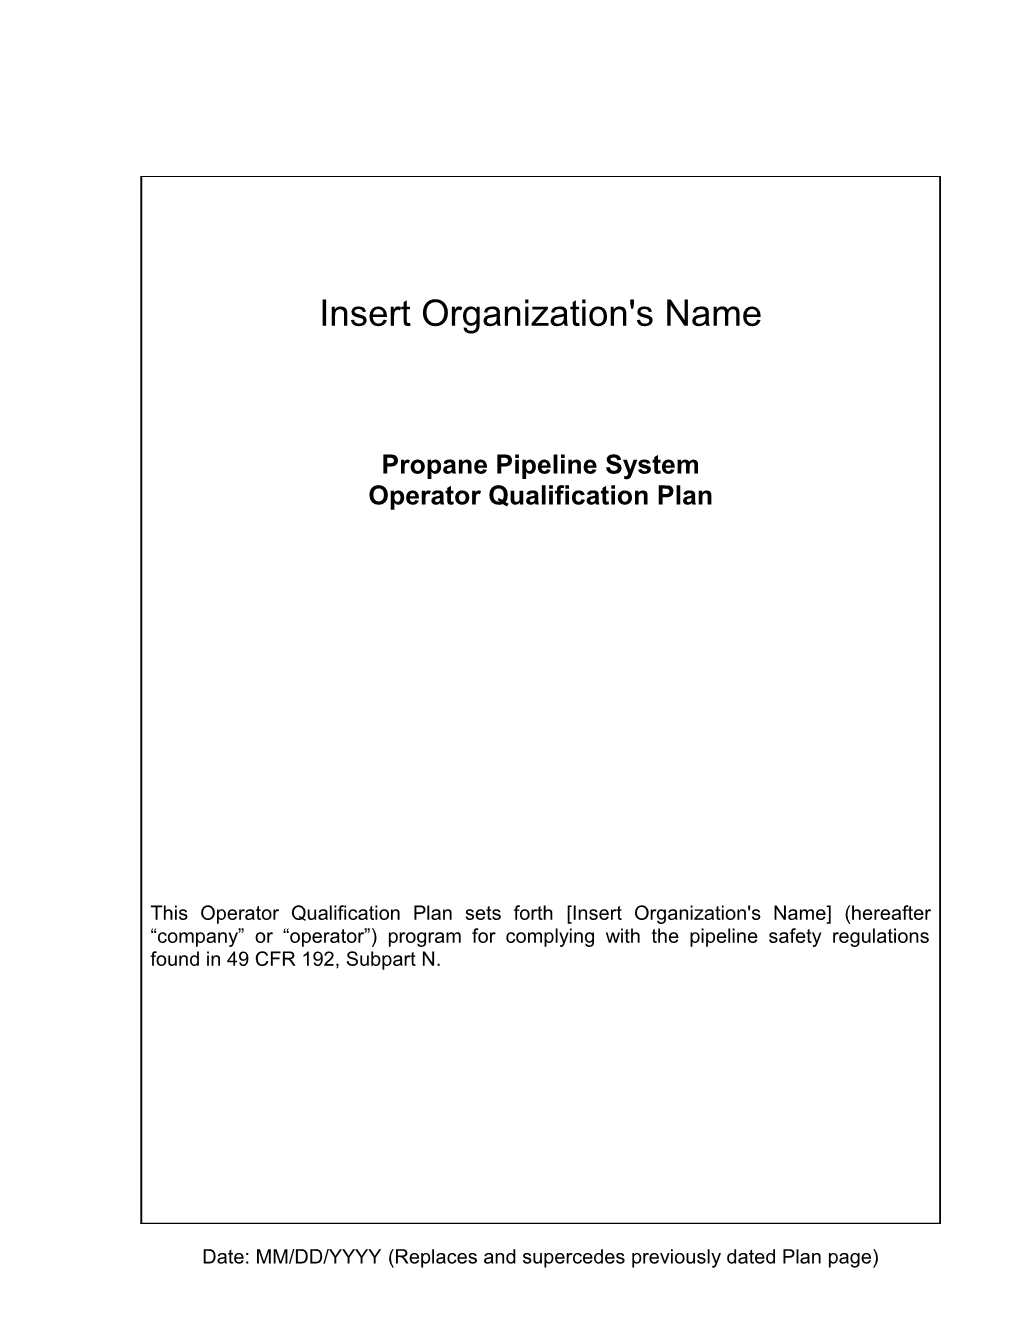 This Operator Qualification Plan Sets Forth Insert Organization's Name Program for Complying